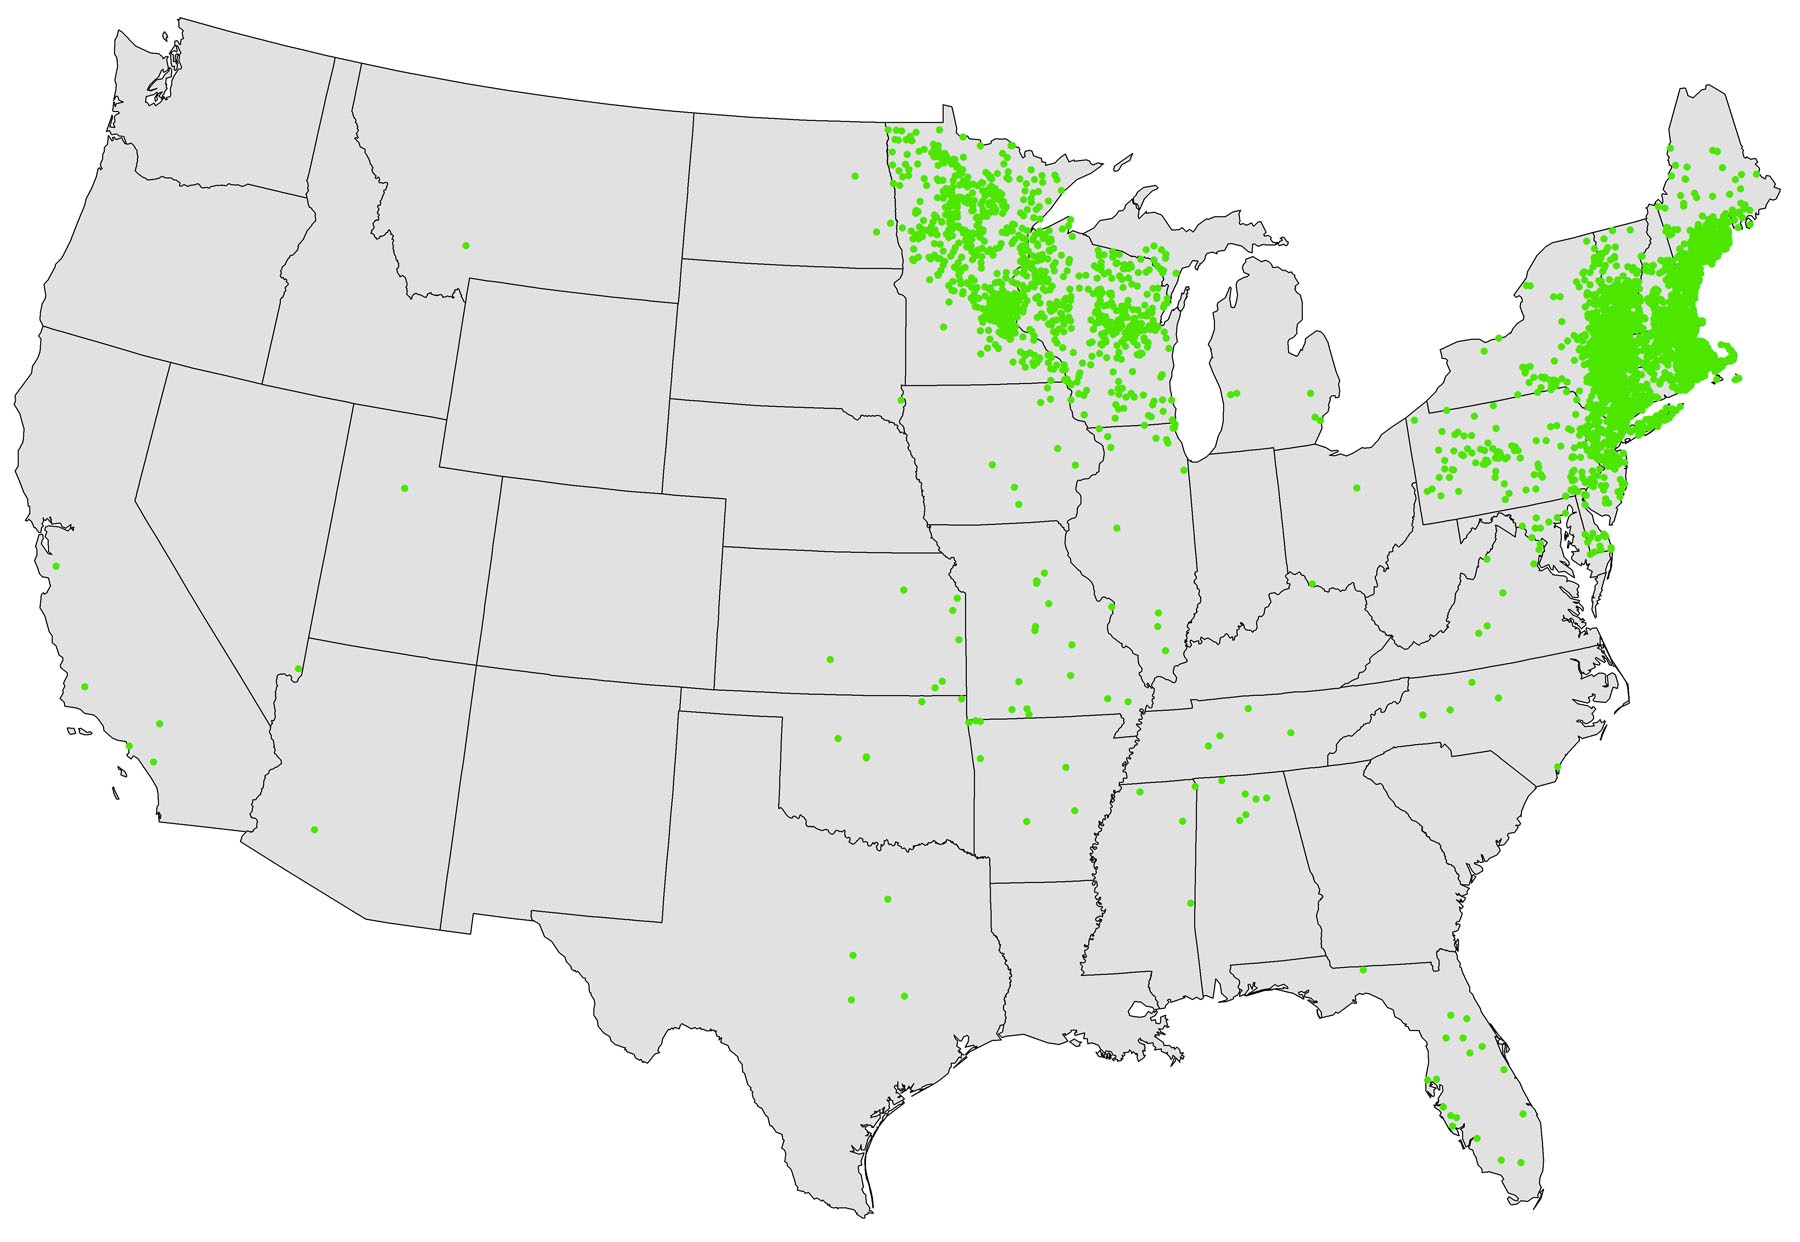 US map showing where cases of Anaplasmosis have been reported. Cases are concentrated in the Northeastern corner of the U.S.